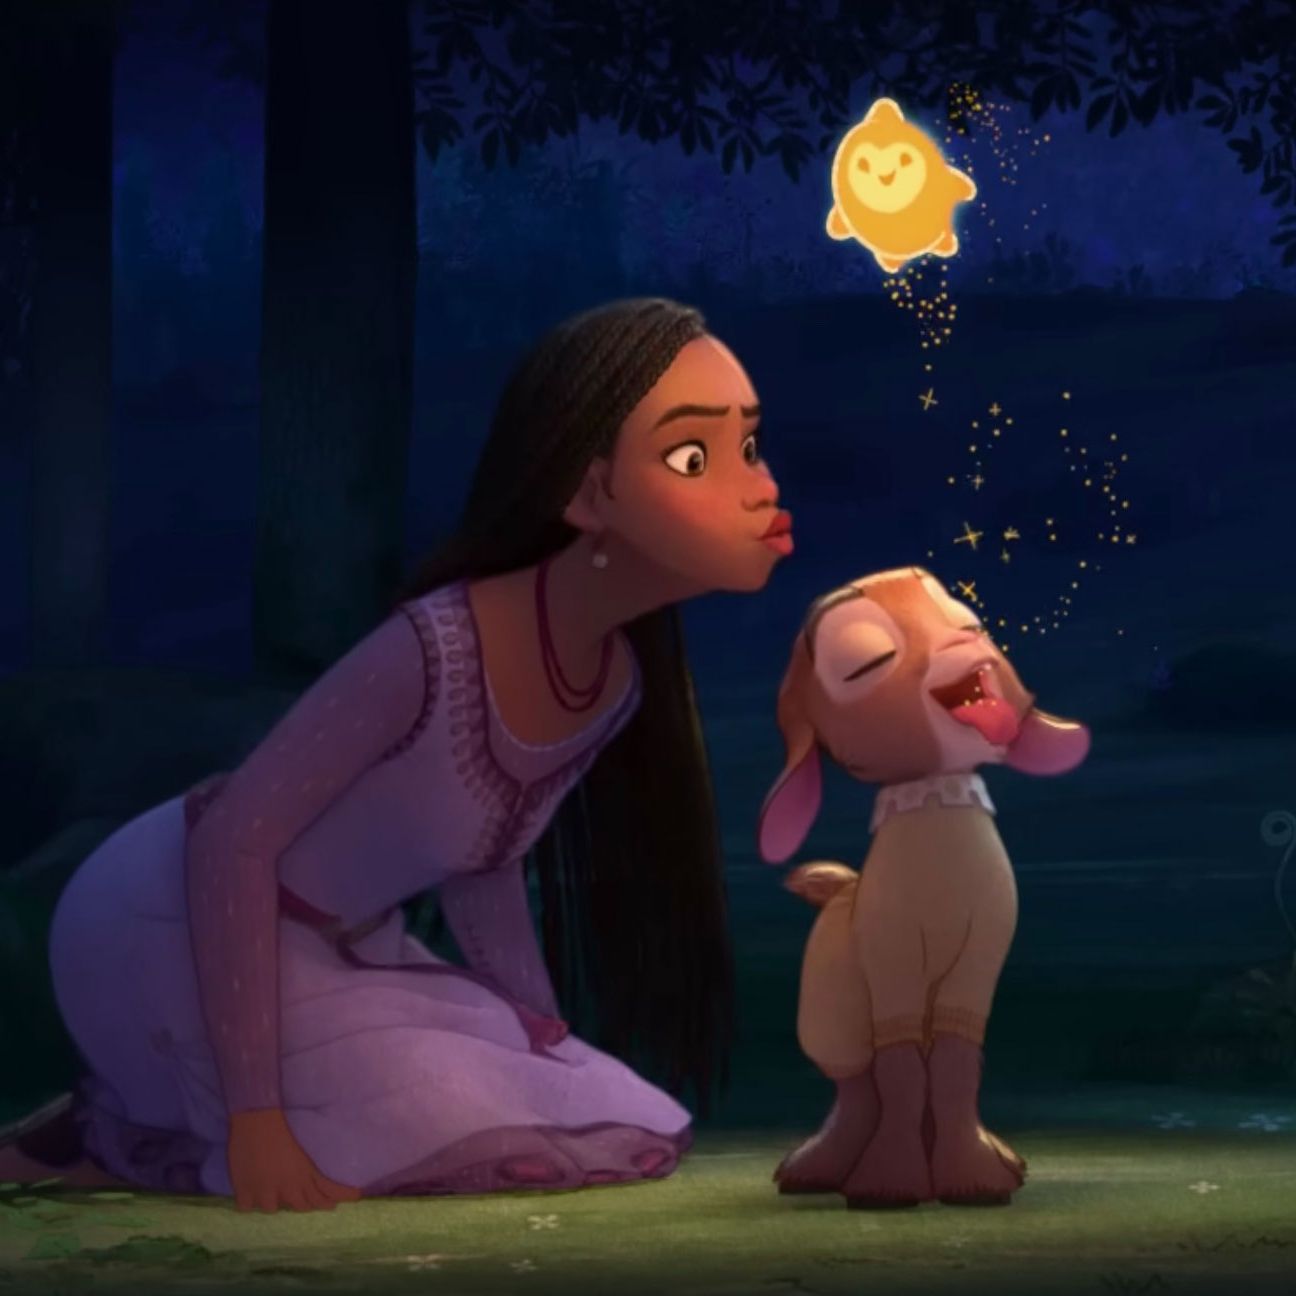 Wish': See Trailer for Disney's New Fairy Tale With Ariana DeBose